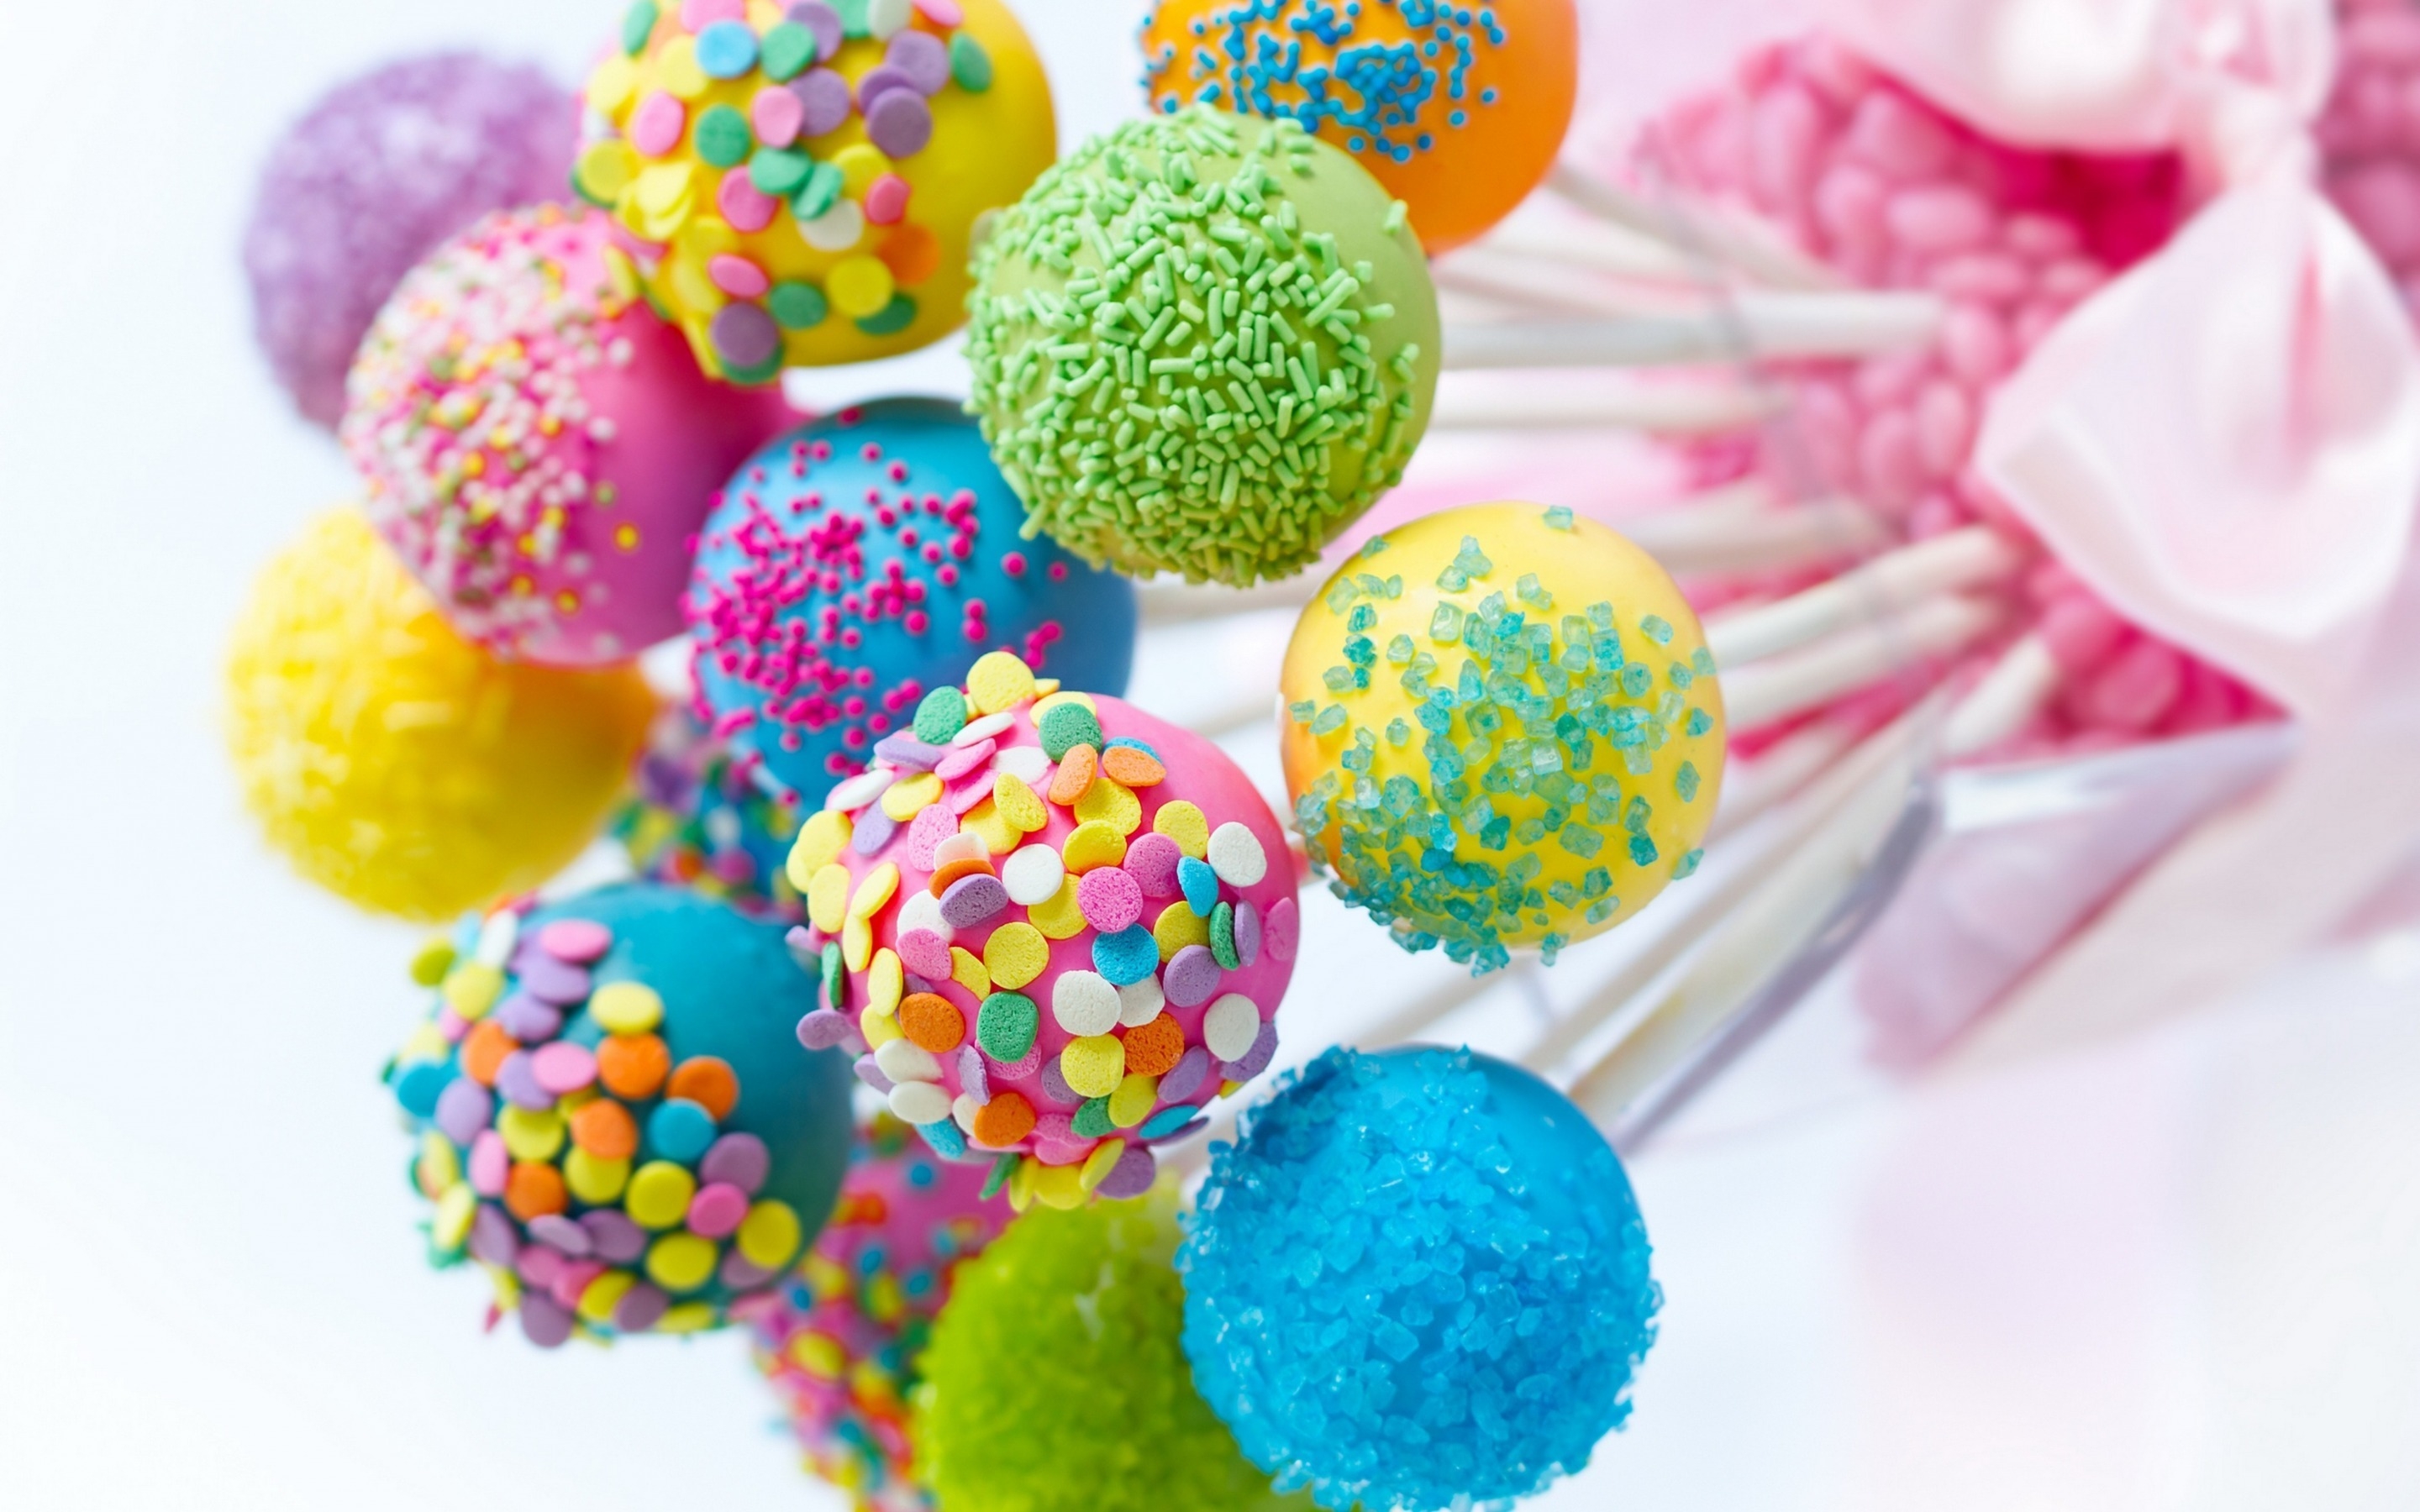 Colored Candies  for 2880 x 1800 Retina Display resolution